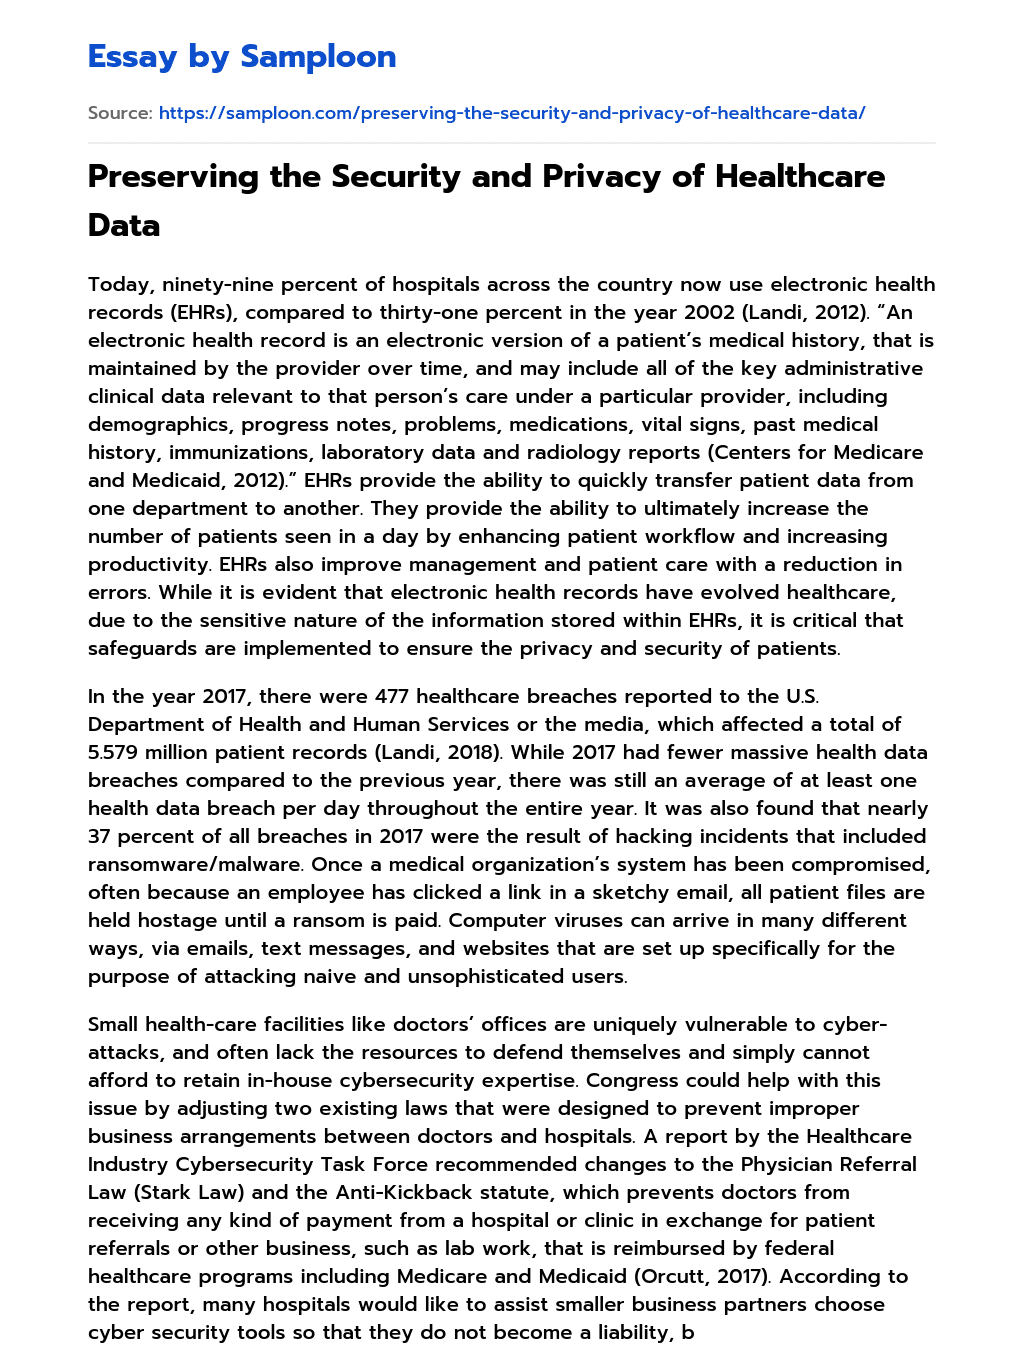 Preserving the Security and Privacy of Healthcare Data  essay